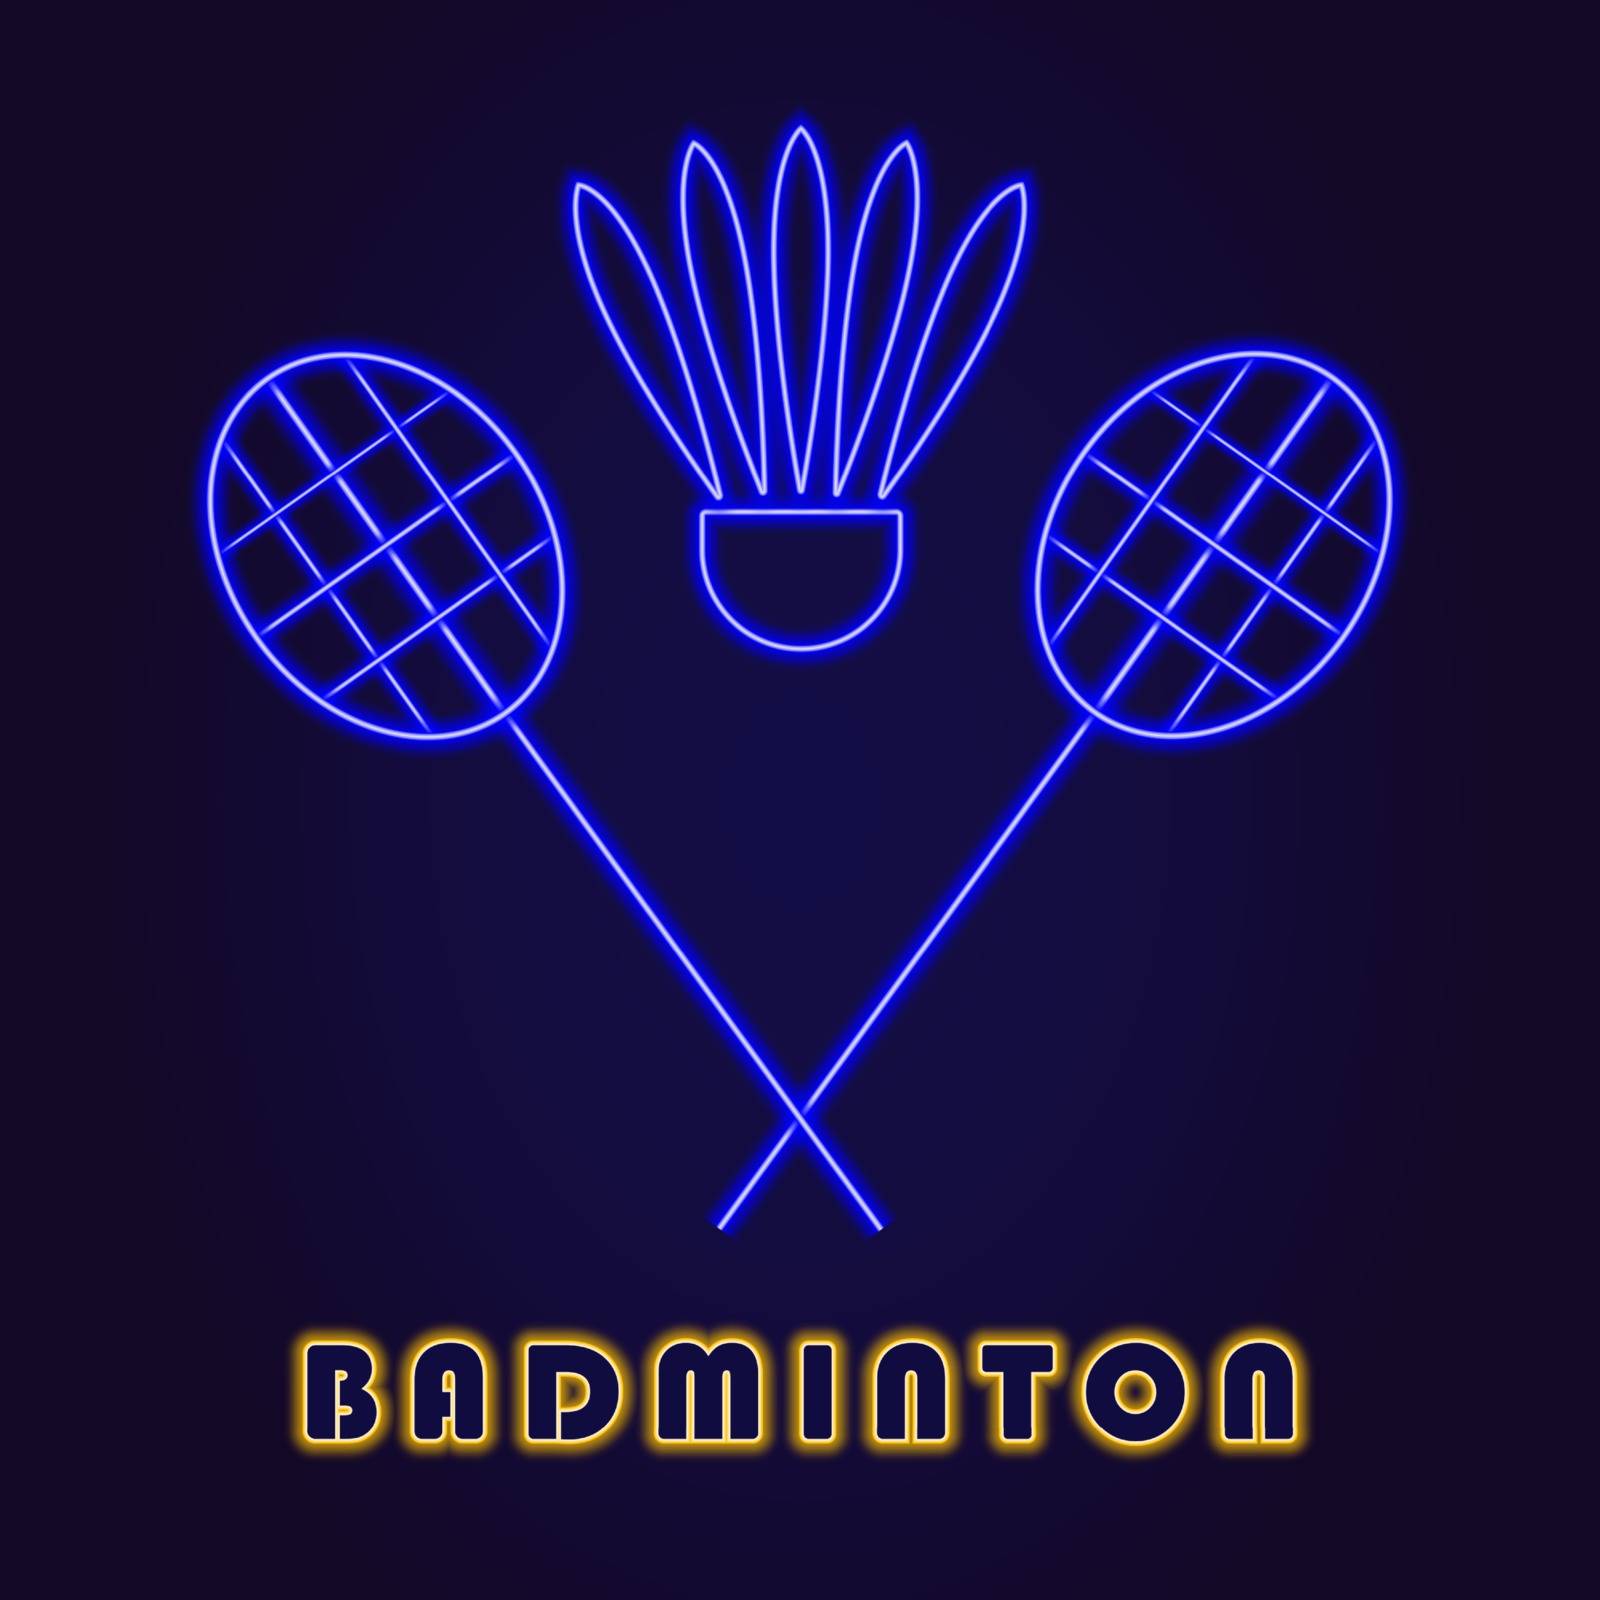 Neon illumination of badminton. Bright racket shuttlecock. Modern vector logo, icon, banner, shield, screen, image labels, baminton. Night advertising on the background of a brick wall by Helenshi